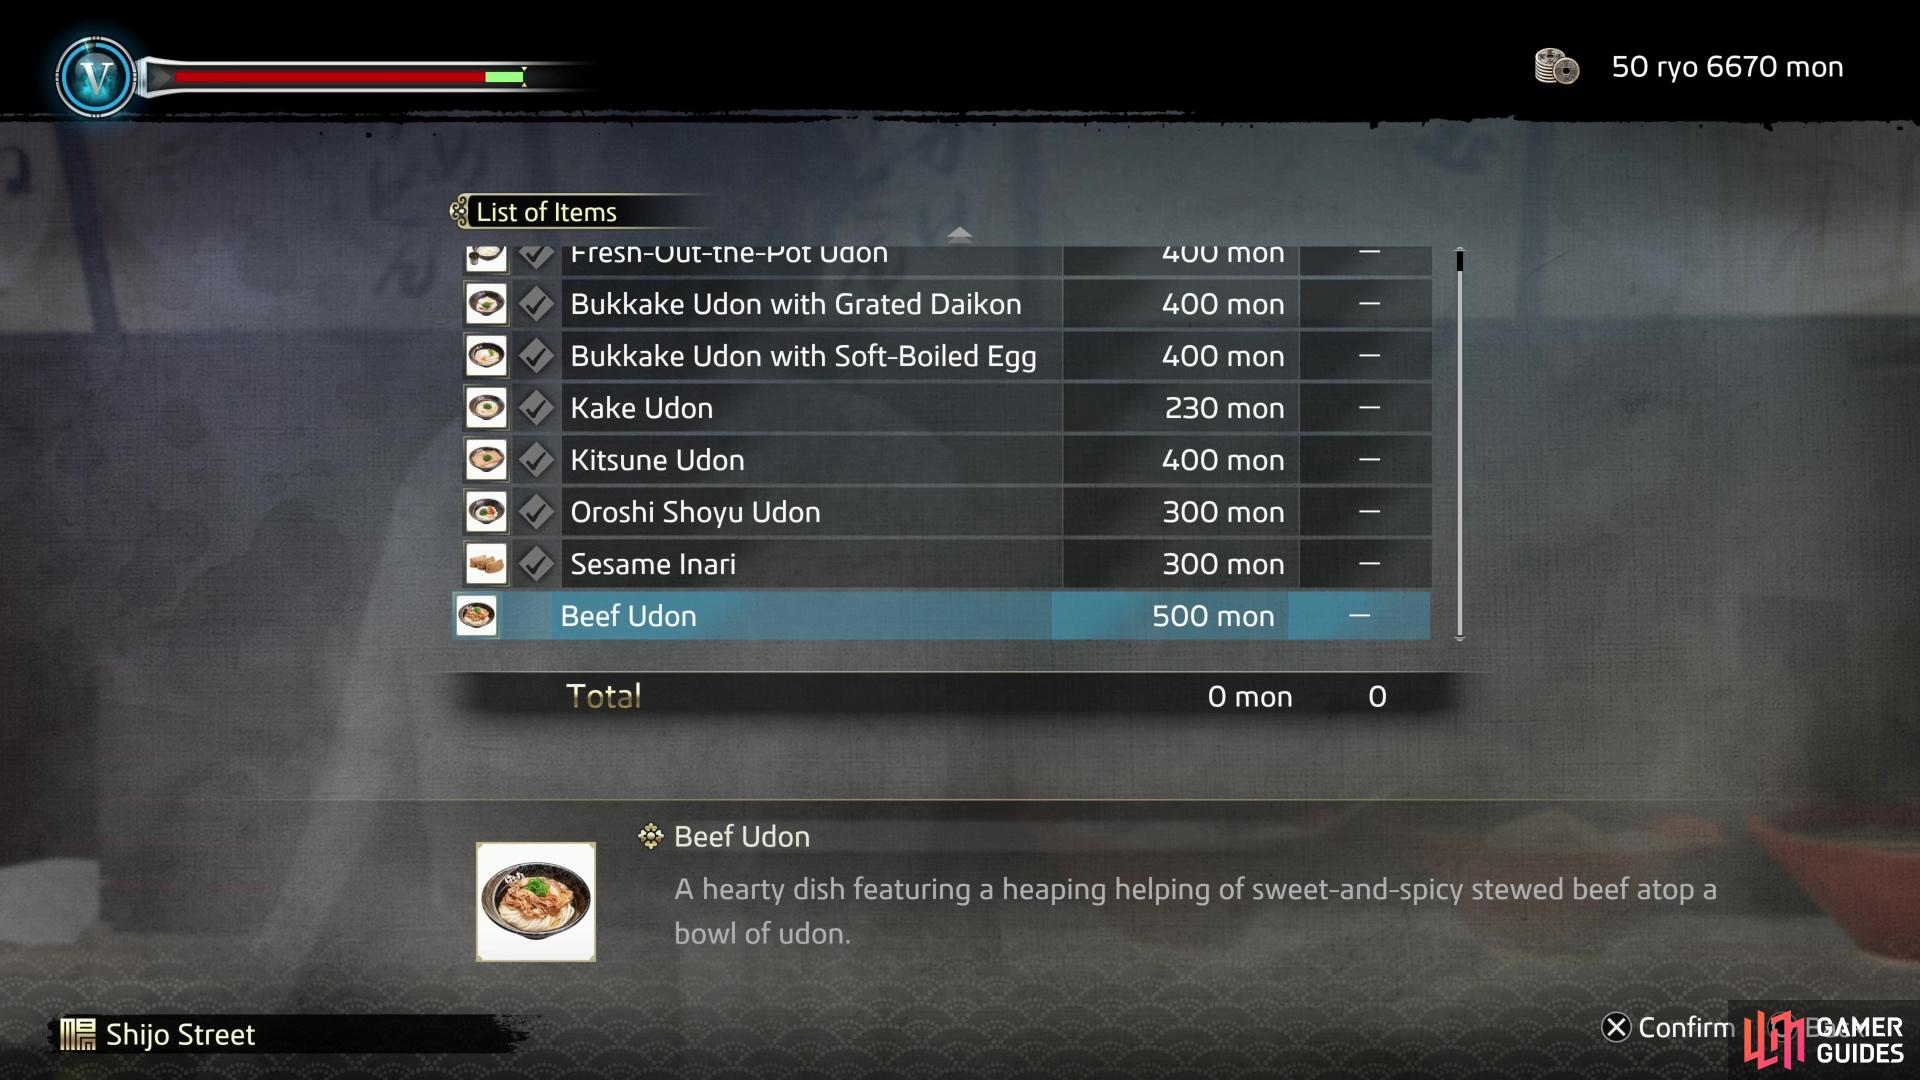 This Beef Udon will be added to the shop, allowing you to purchase it for 500 mon.